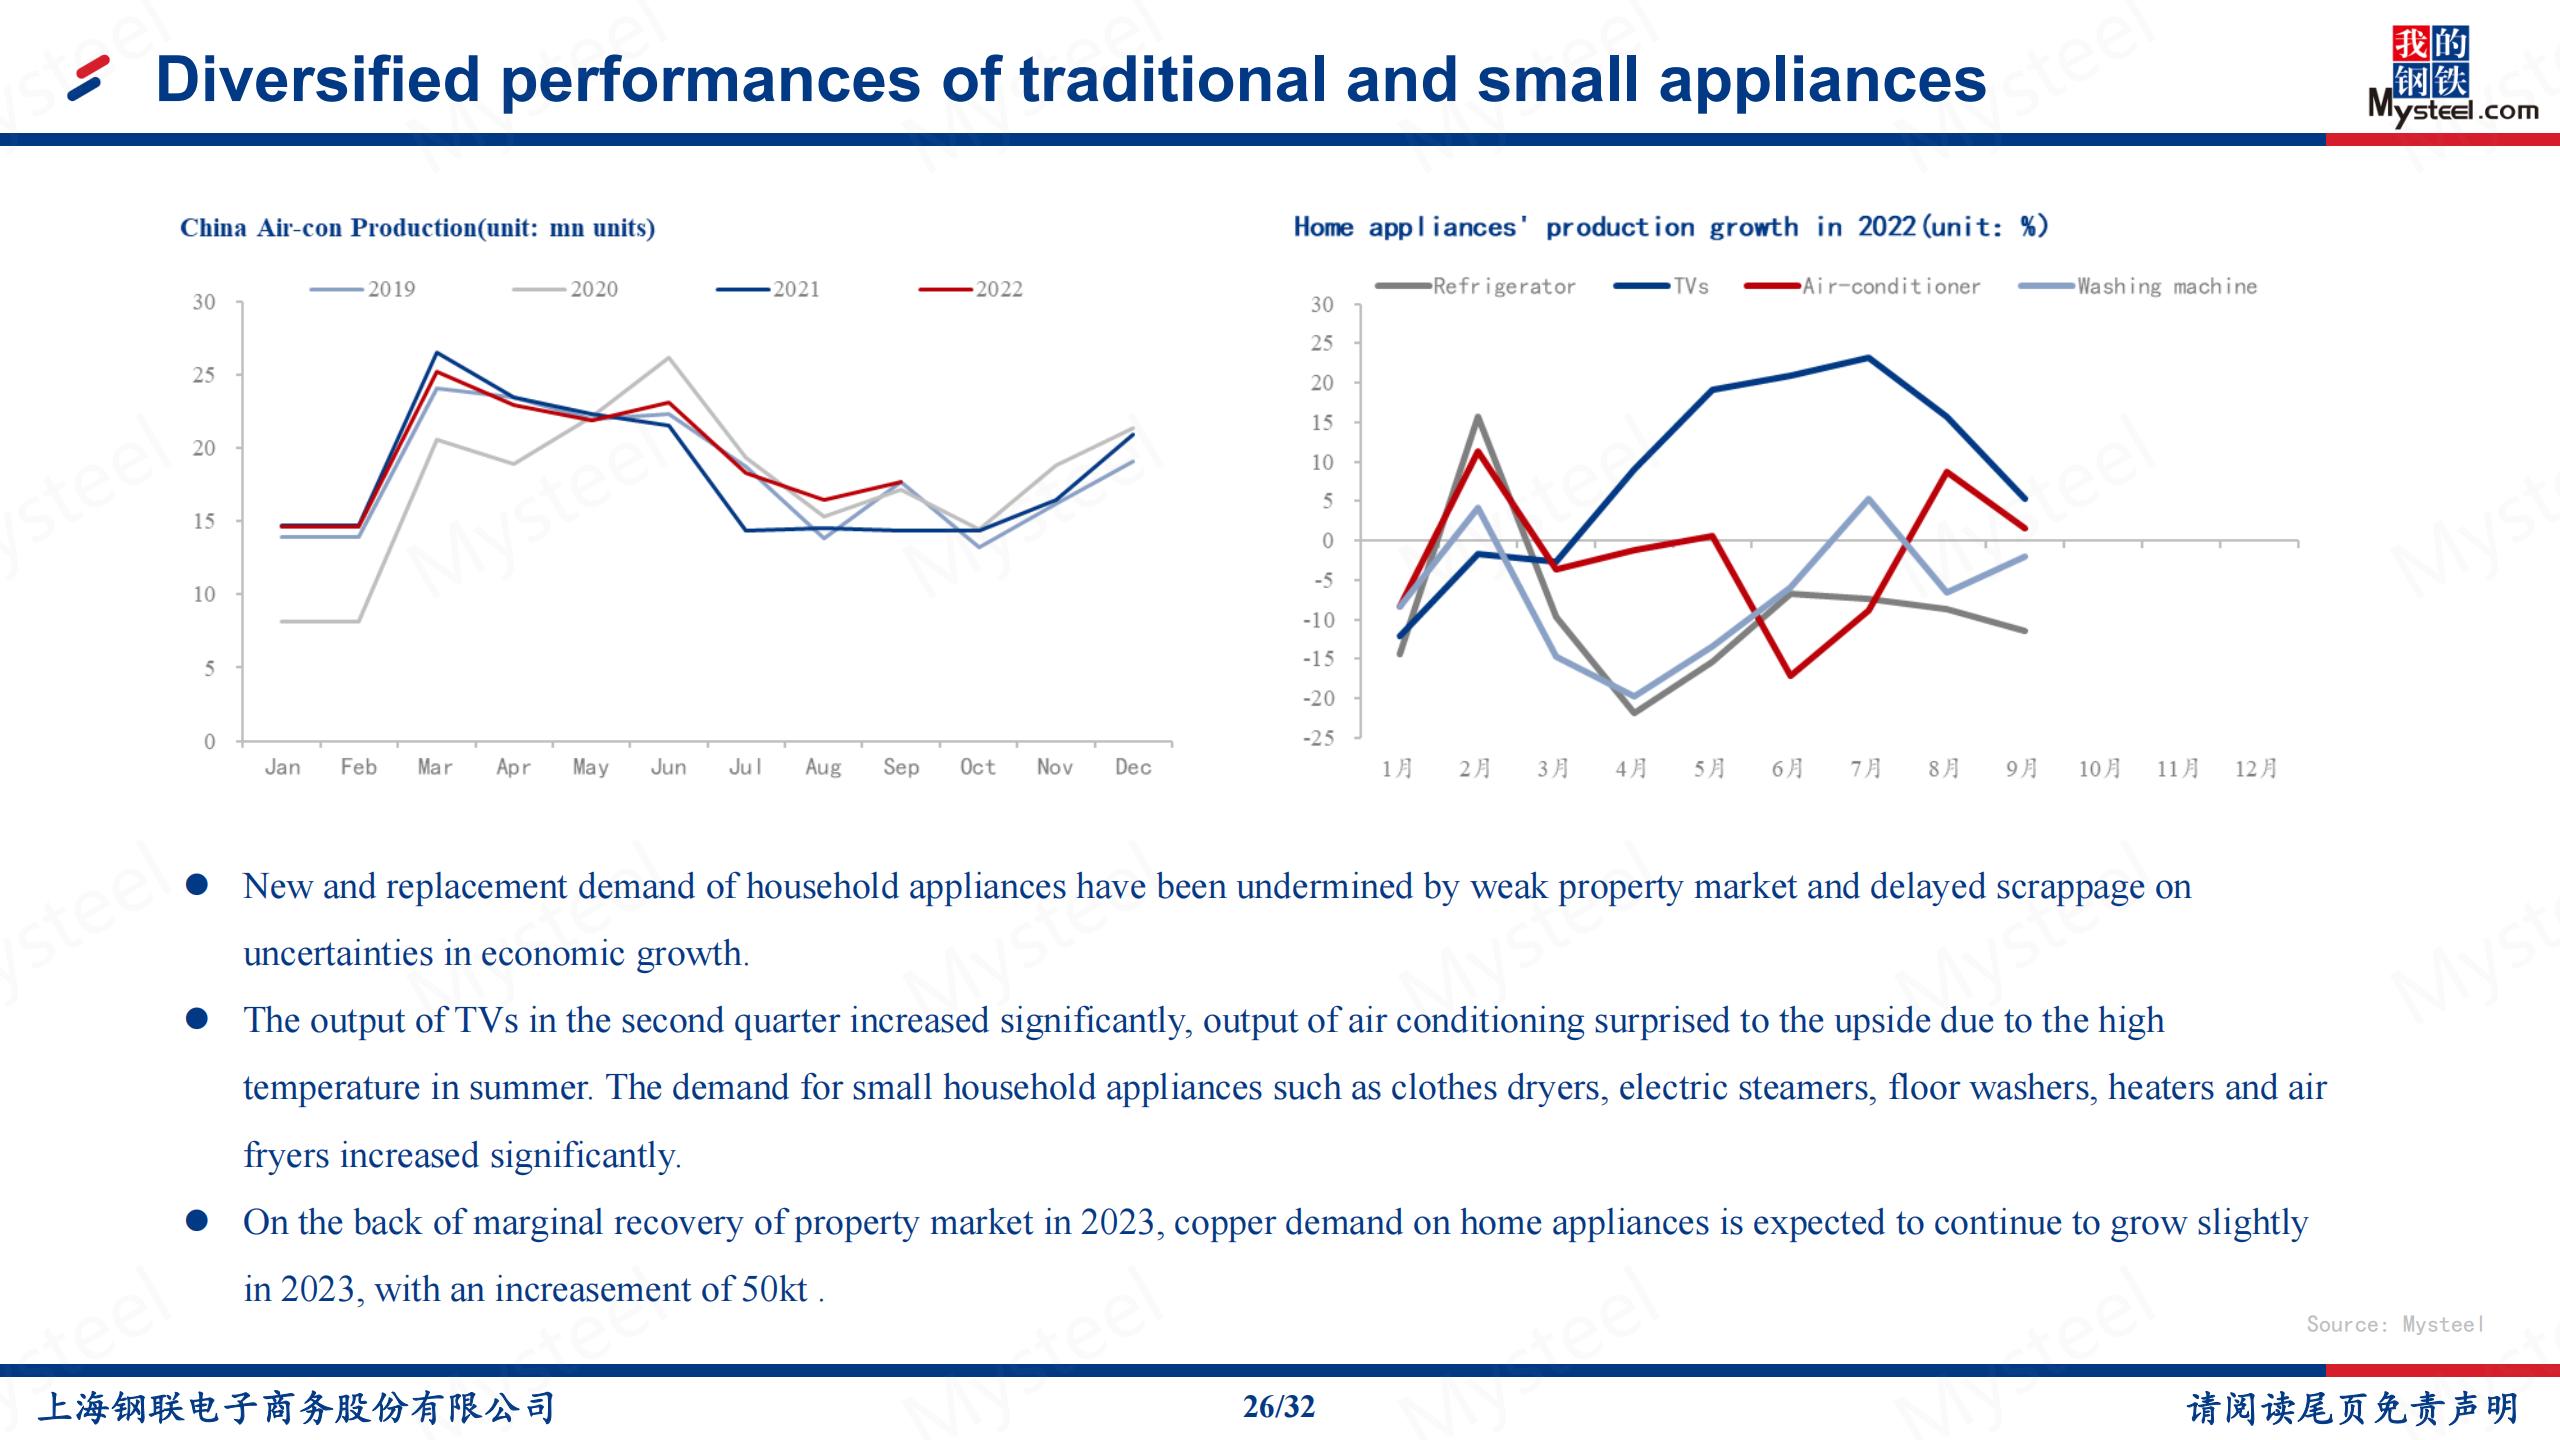 Traditional and small appliance growth in China